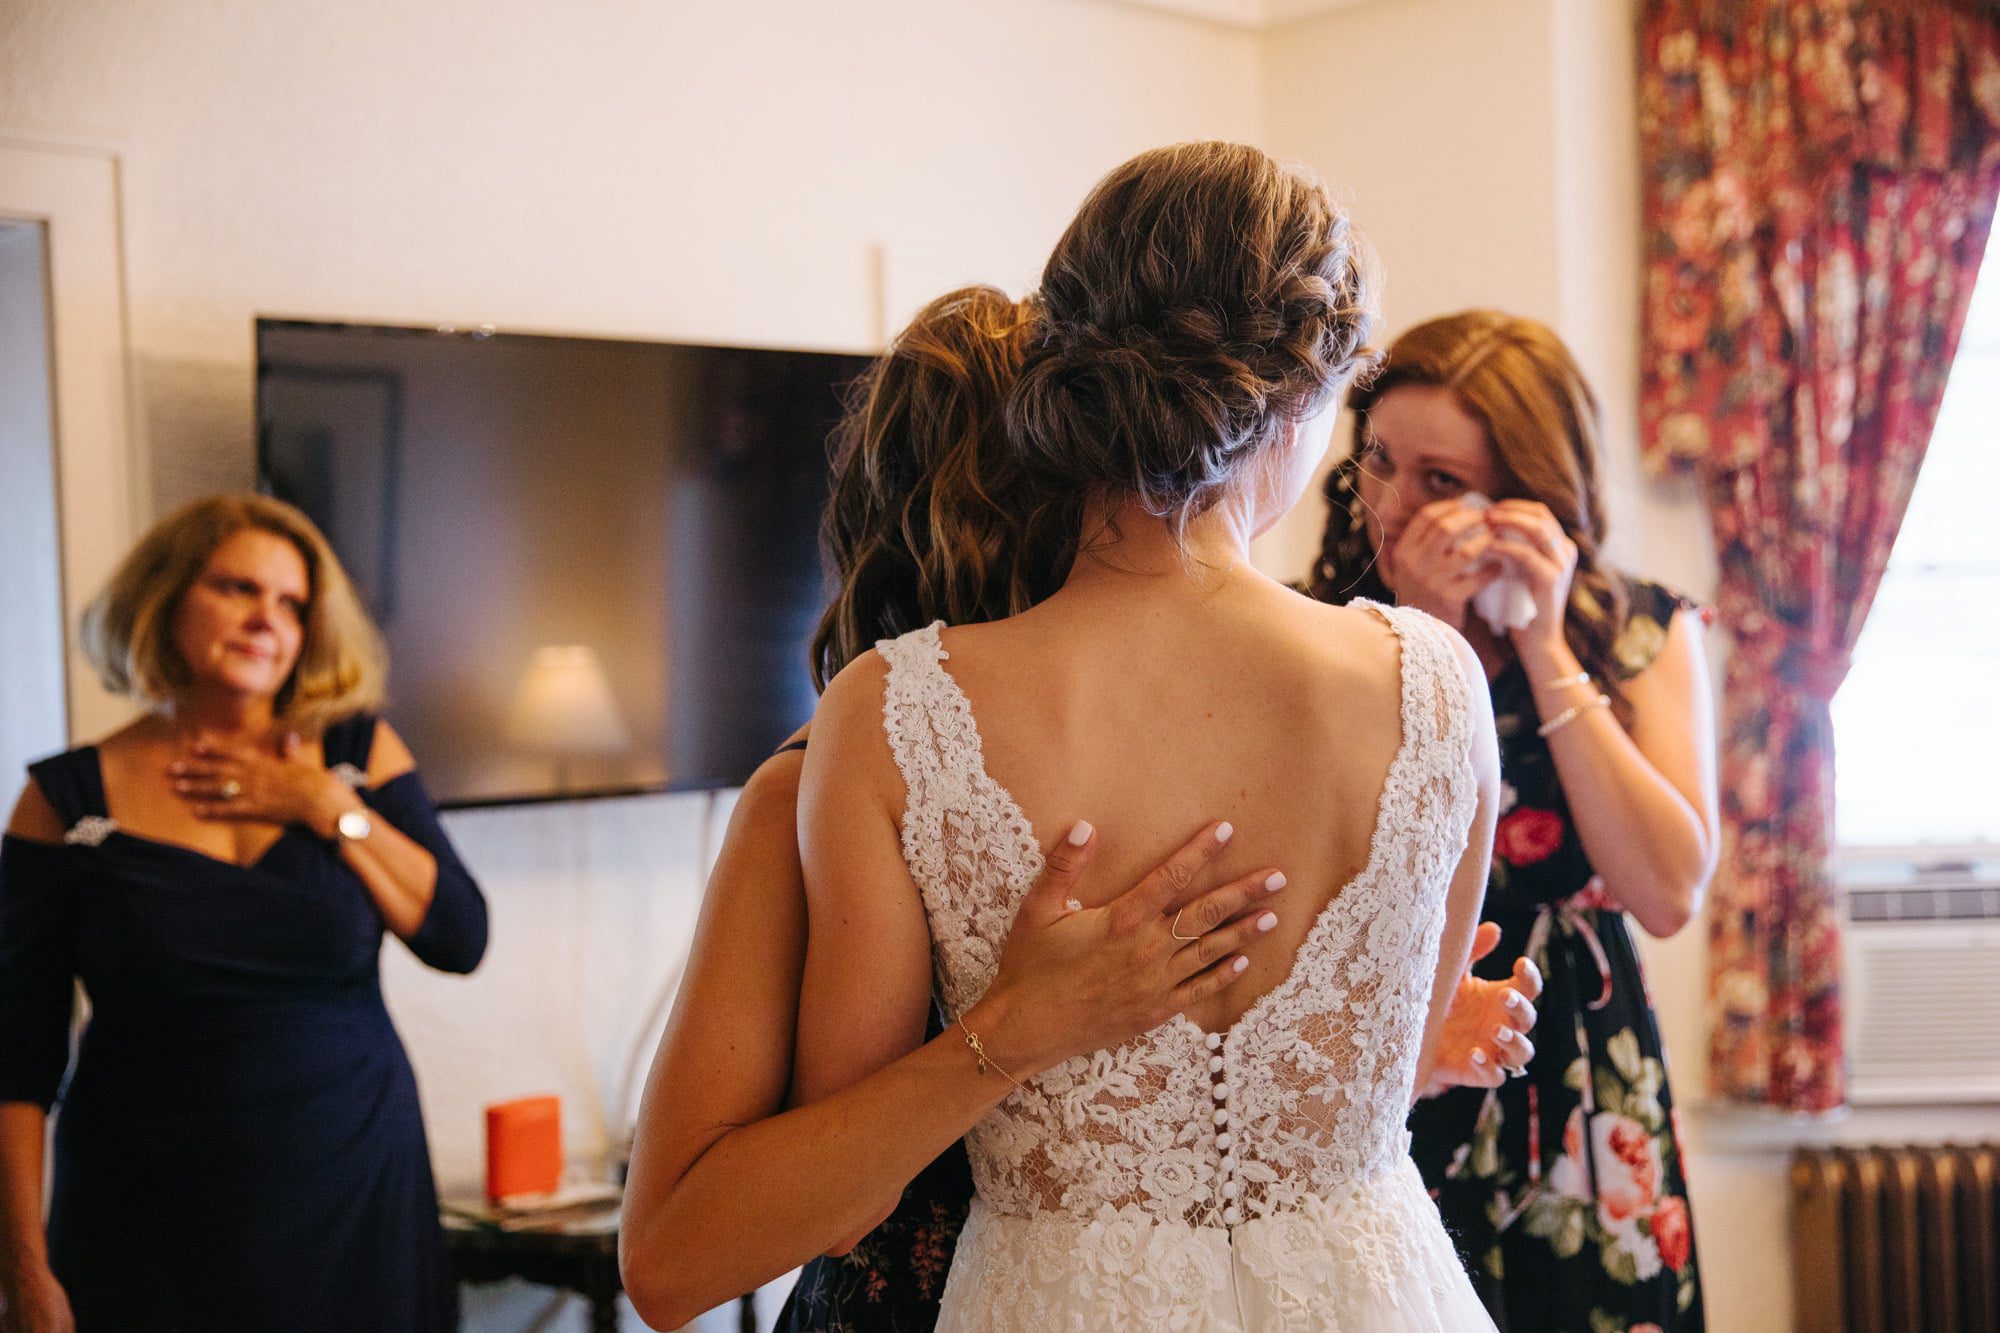 bride with family, bride getting ready with family, emotional family during wedding